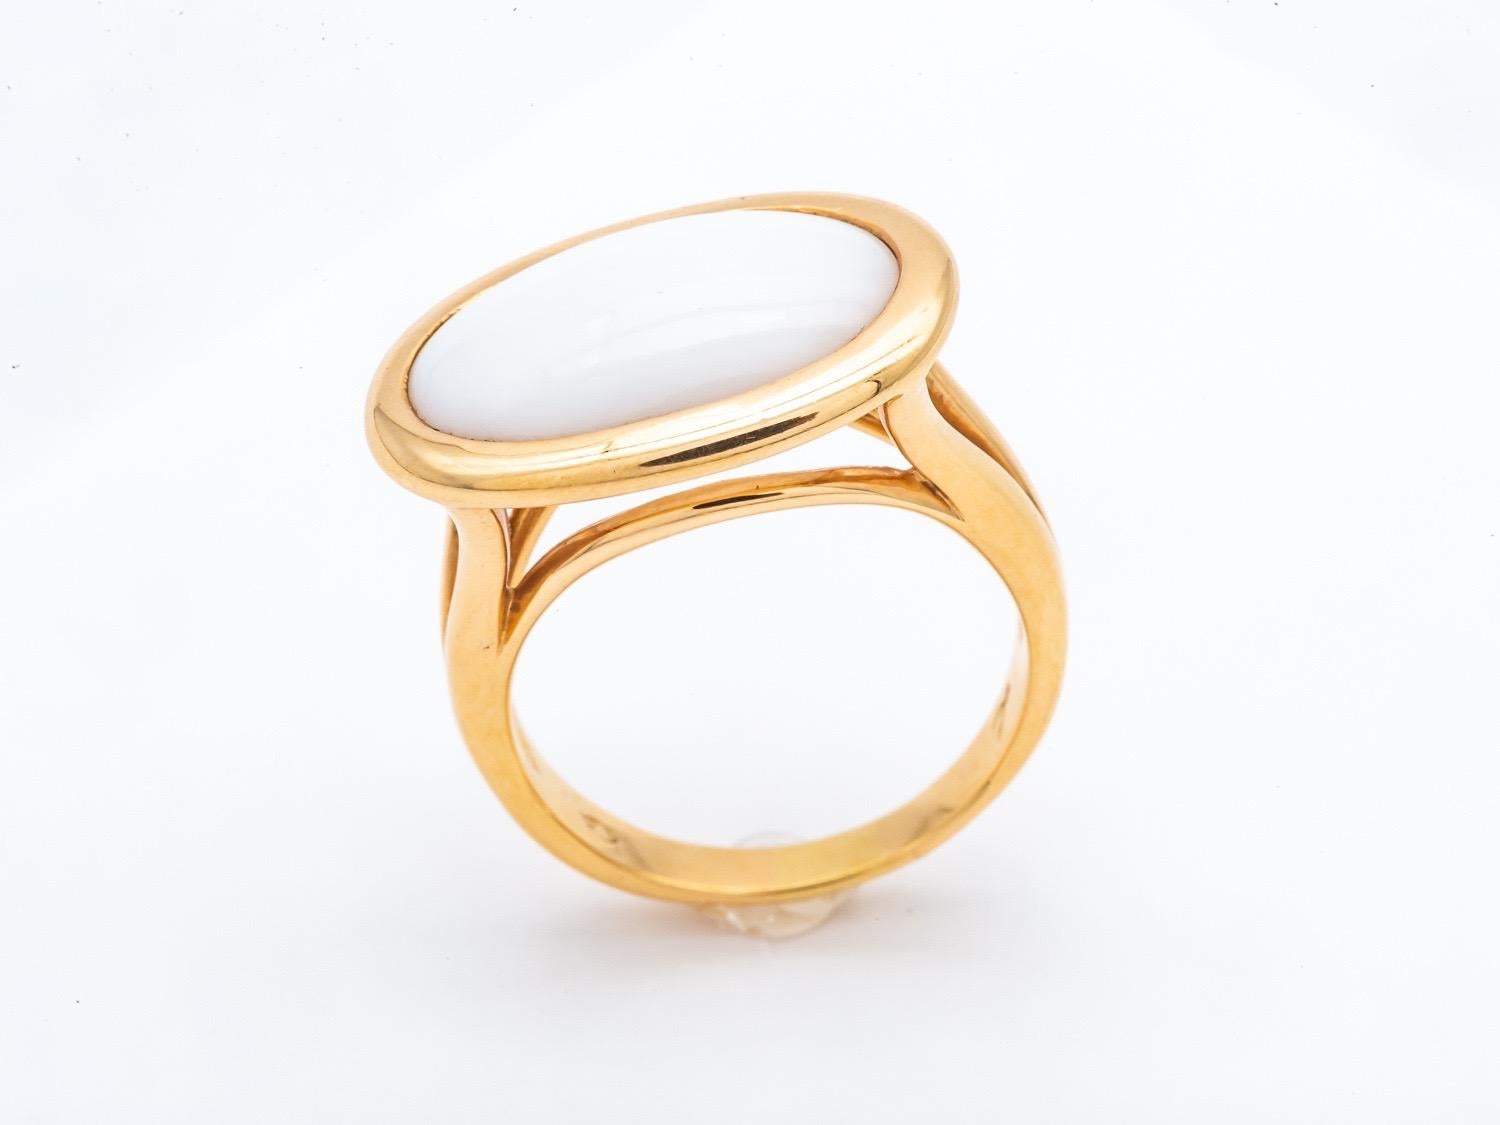 Ring 18 Carat Pink Gold Art Deco Style Surmounted by a white Onyx Stone Set Closed
the plank onyx stone is cut into half oval cabochon.
French size 57
size US 8
weight of gold 8 grams